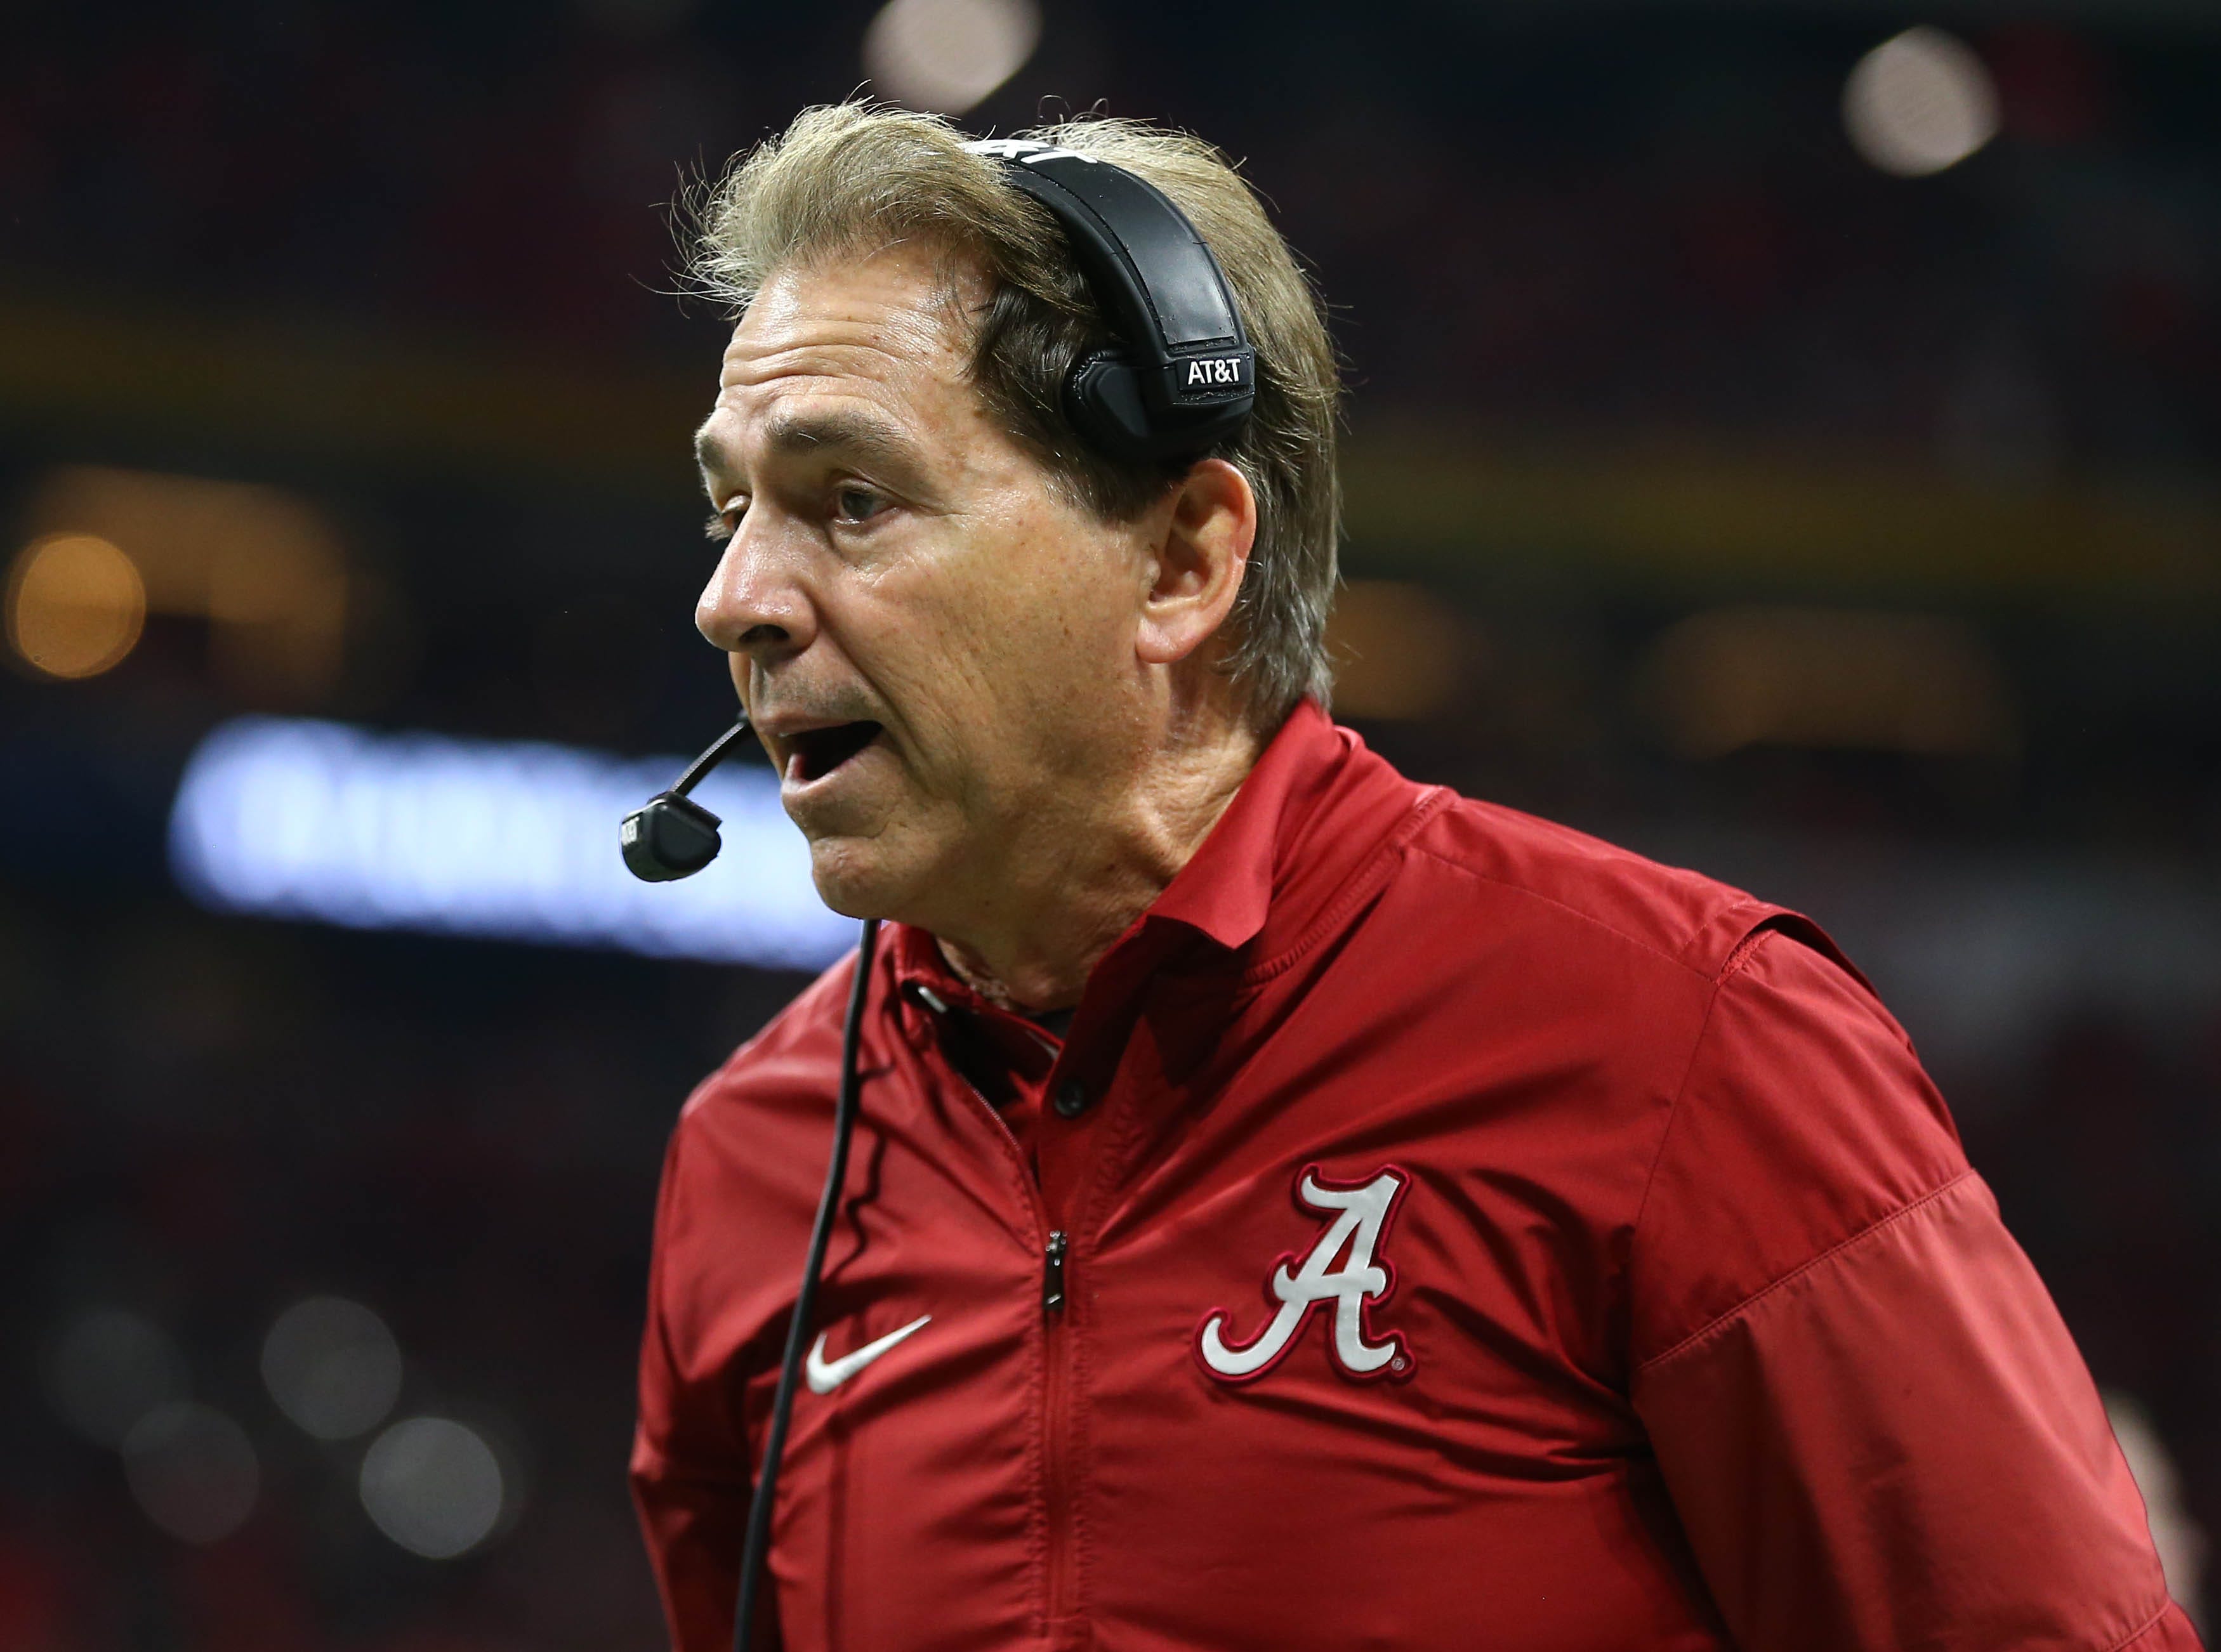 Nick Saban: Alabama coach will make $ million in new contract